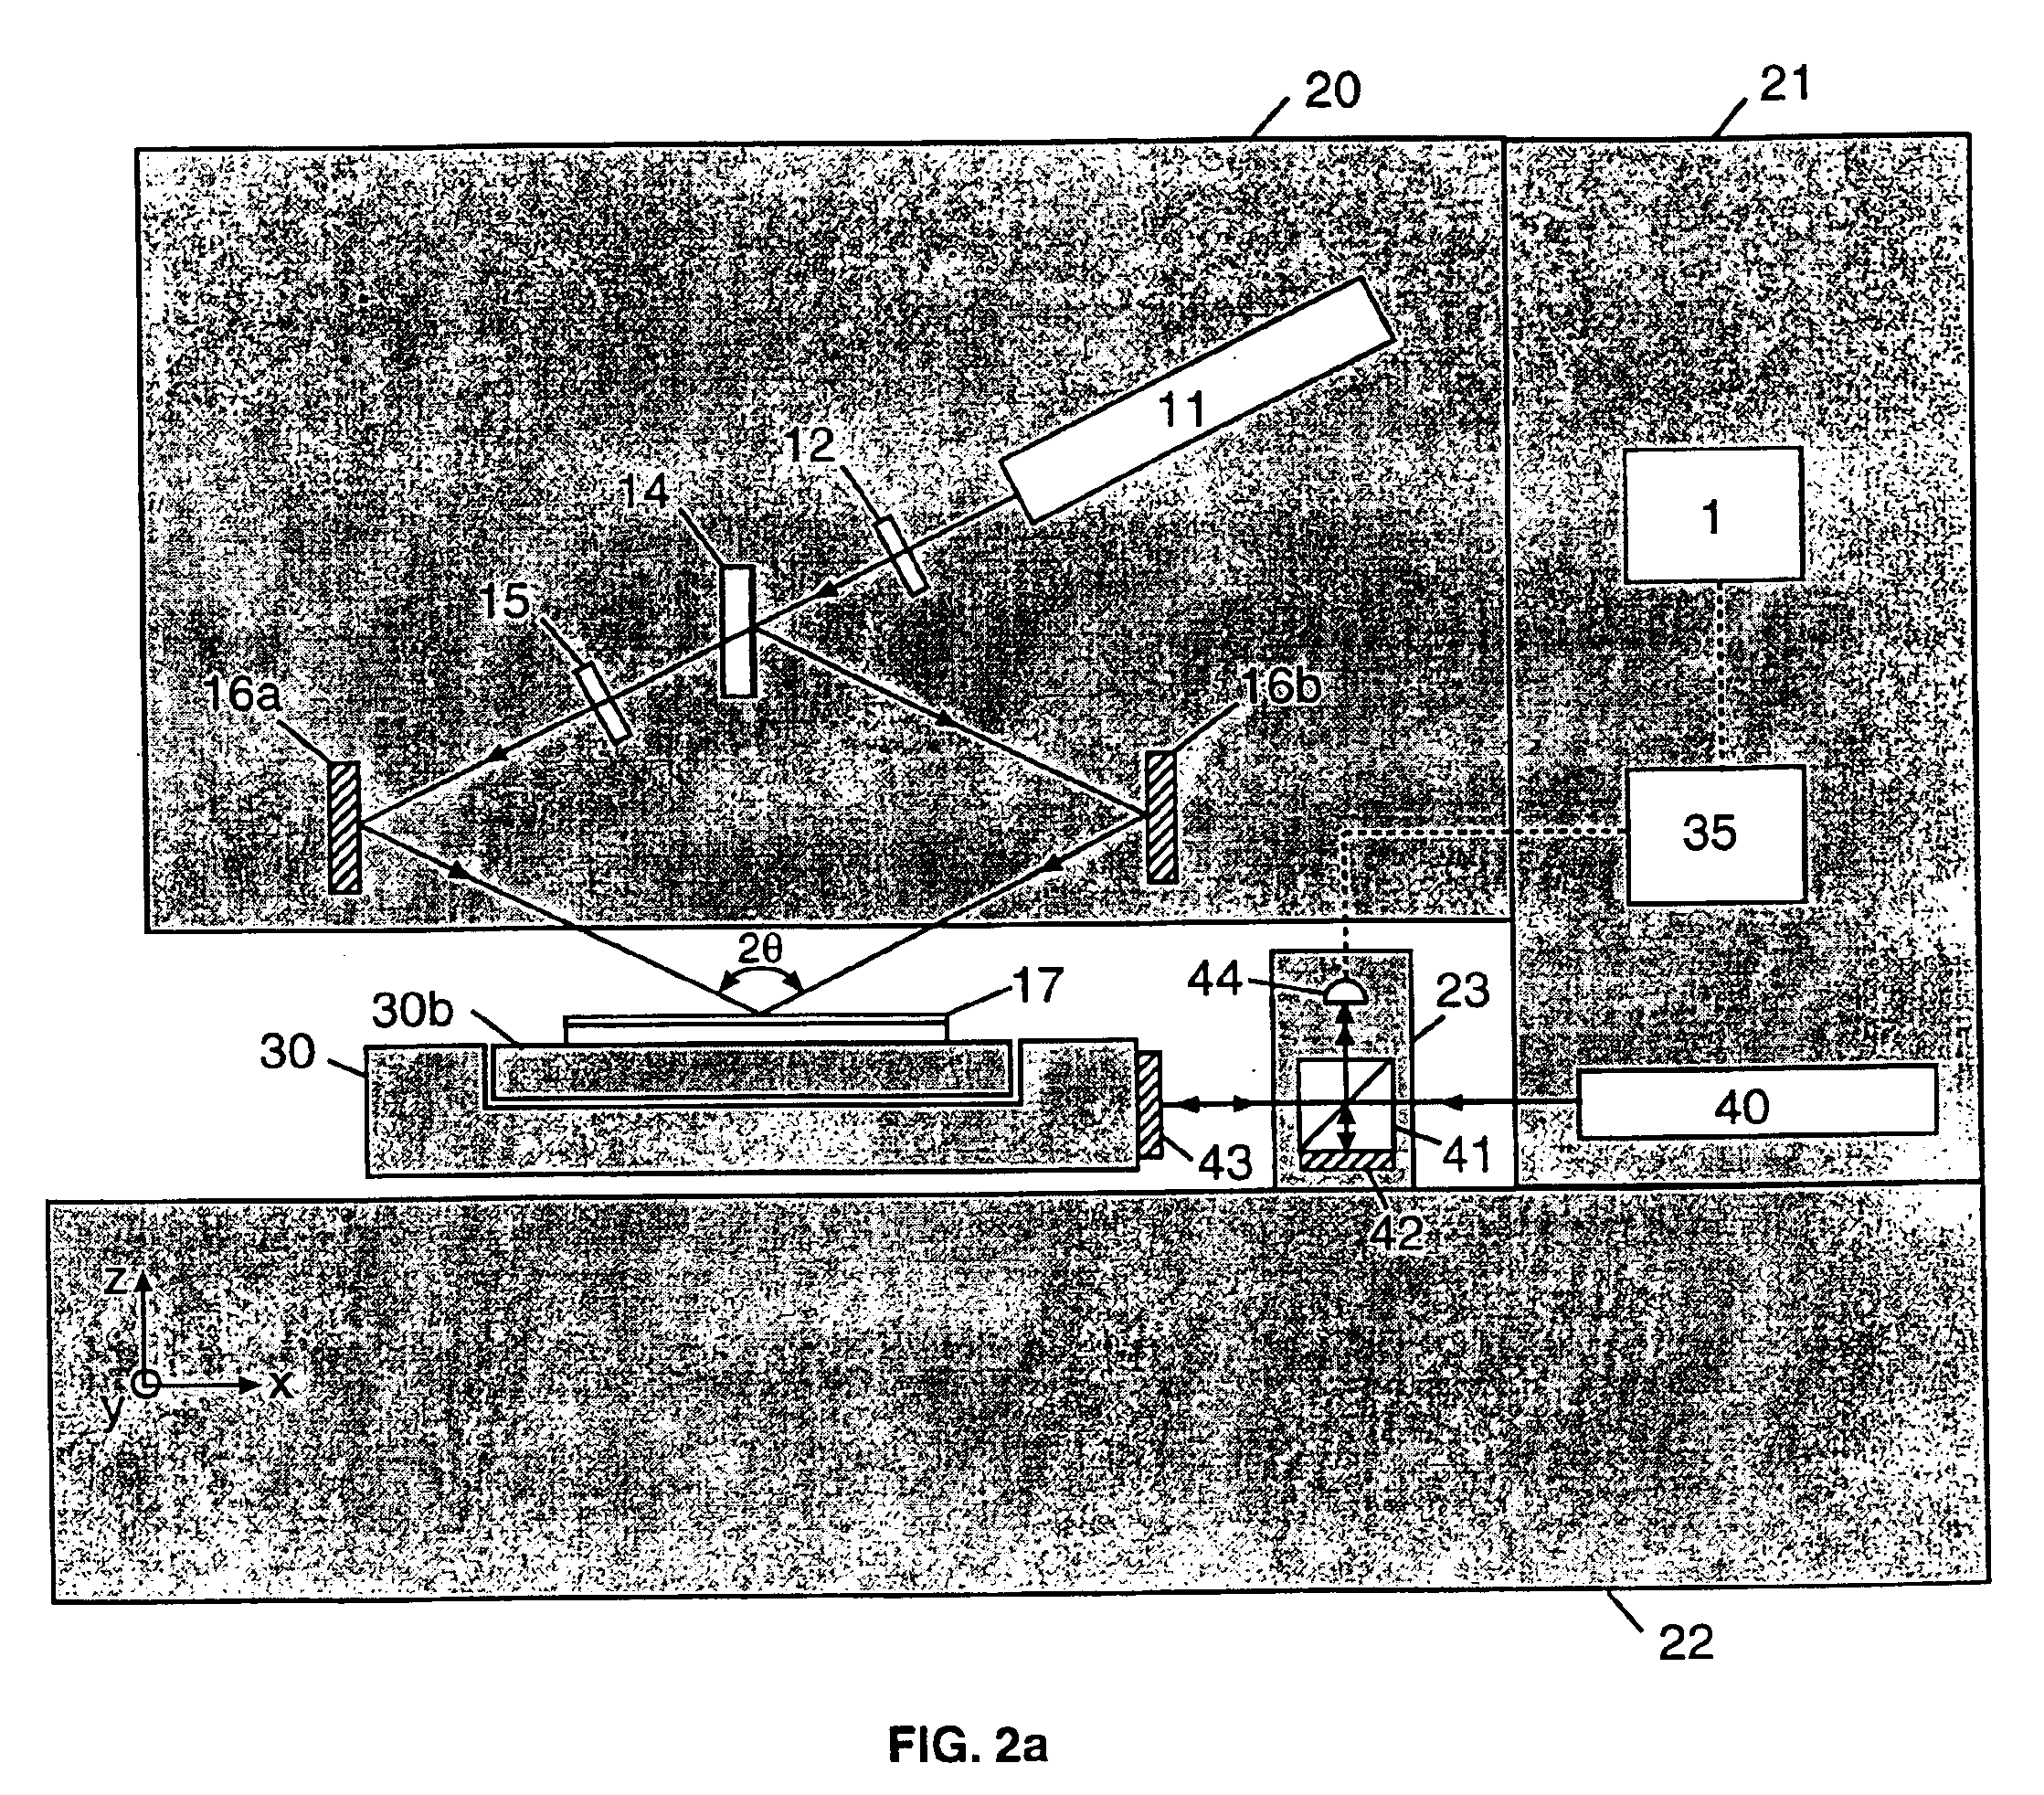 Method and system for interference lithography utilizing phase-locked scanning beams